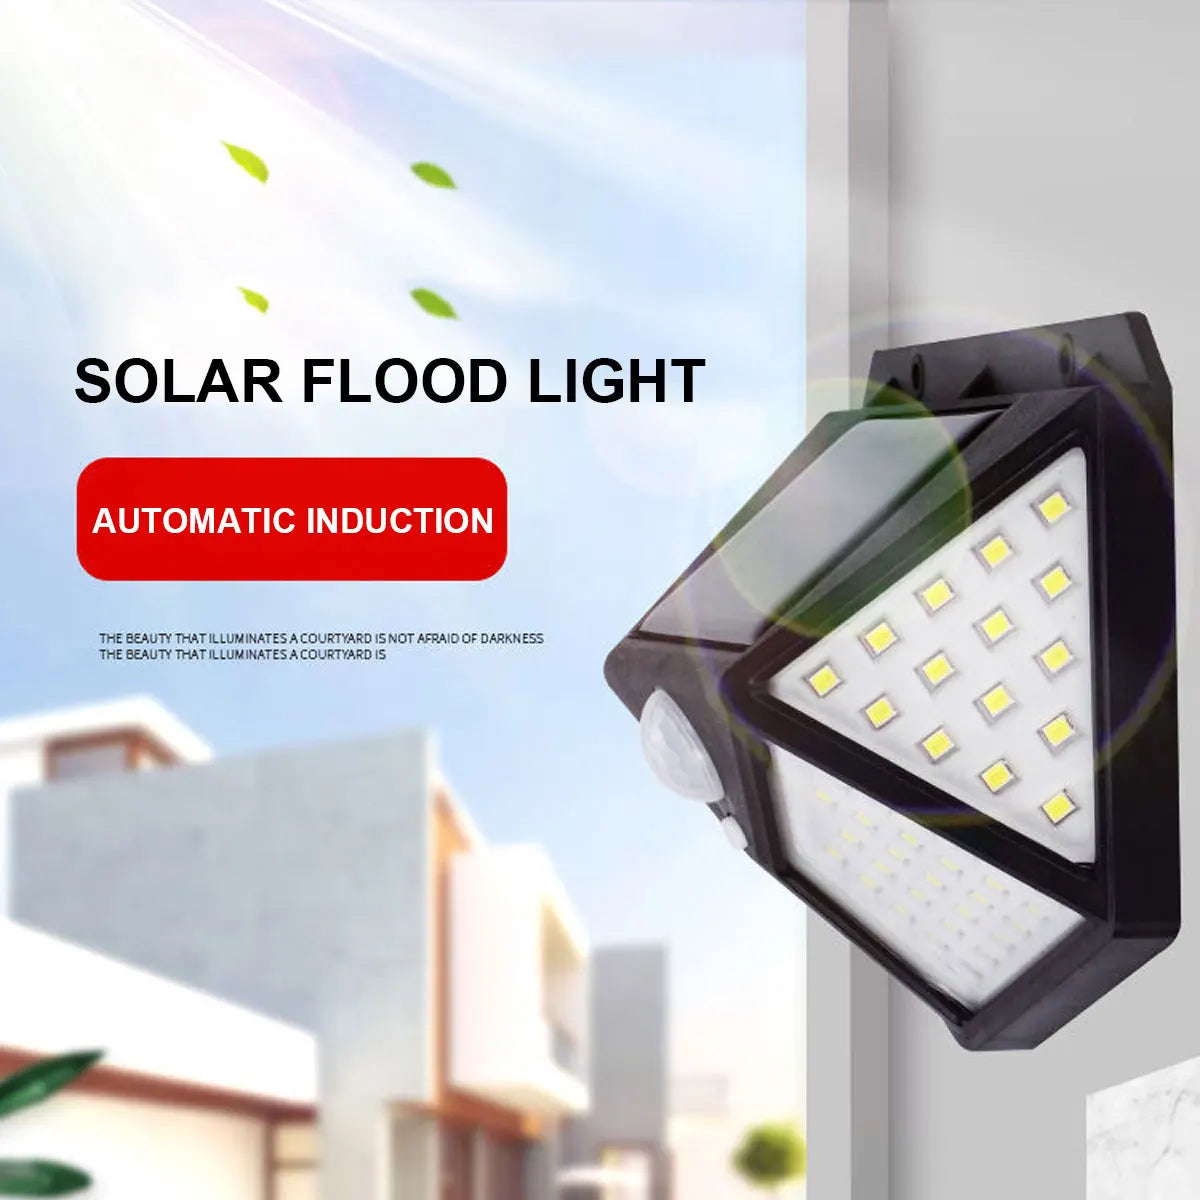 Solar-powered flood light with 400 LEDs, no wiring required, perfect for outdoor spaces.